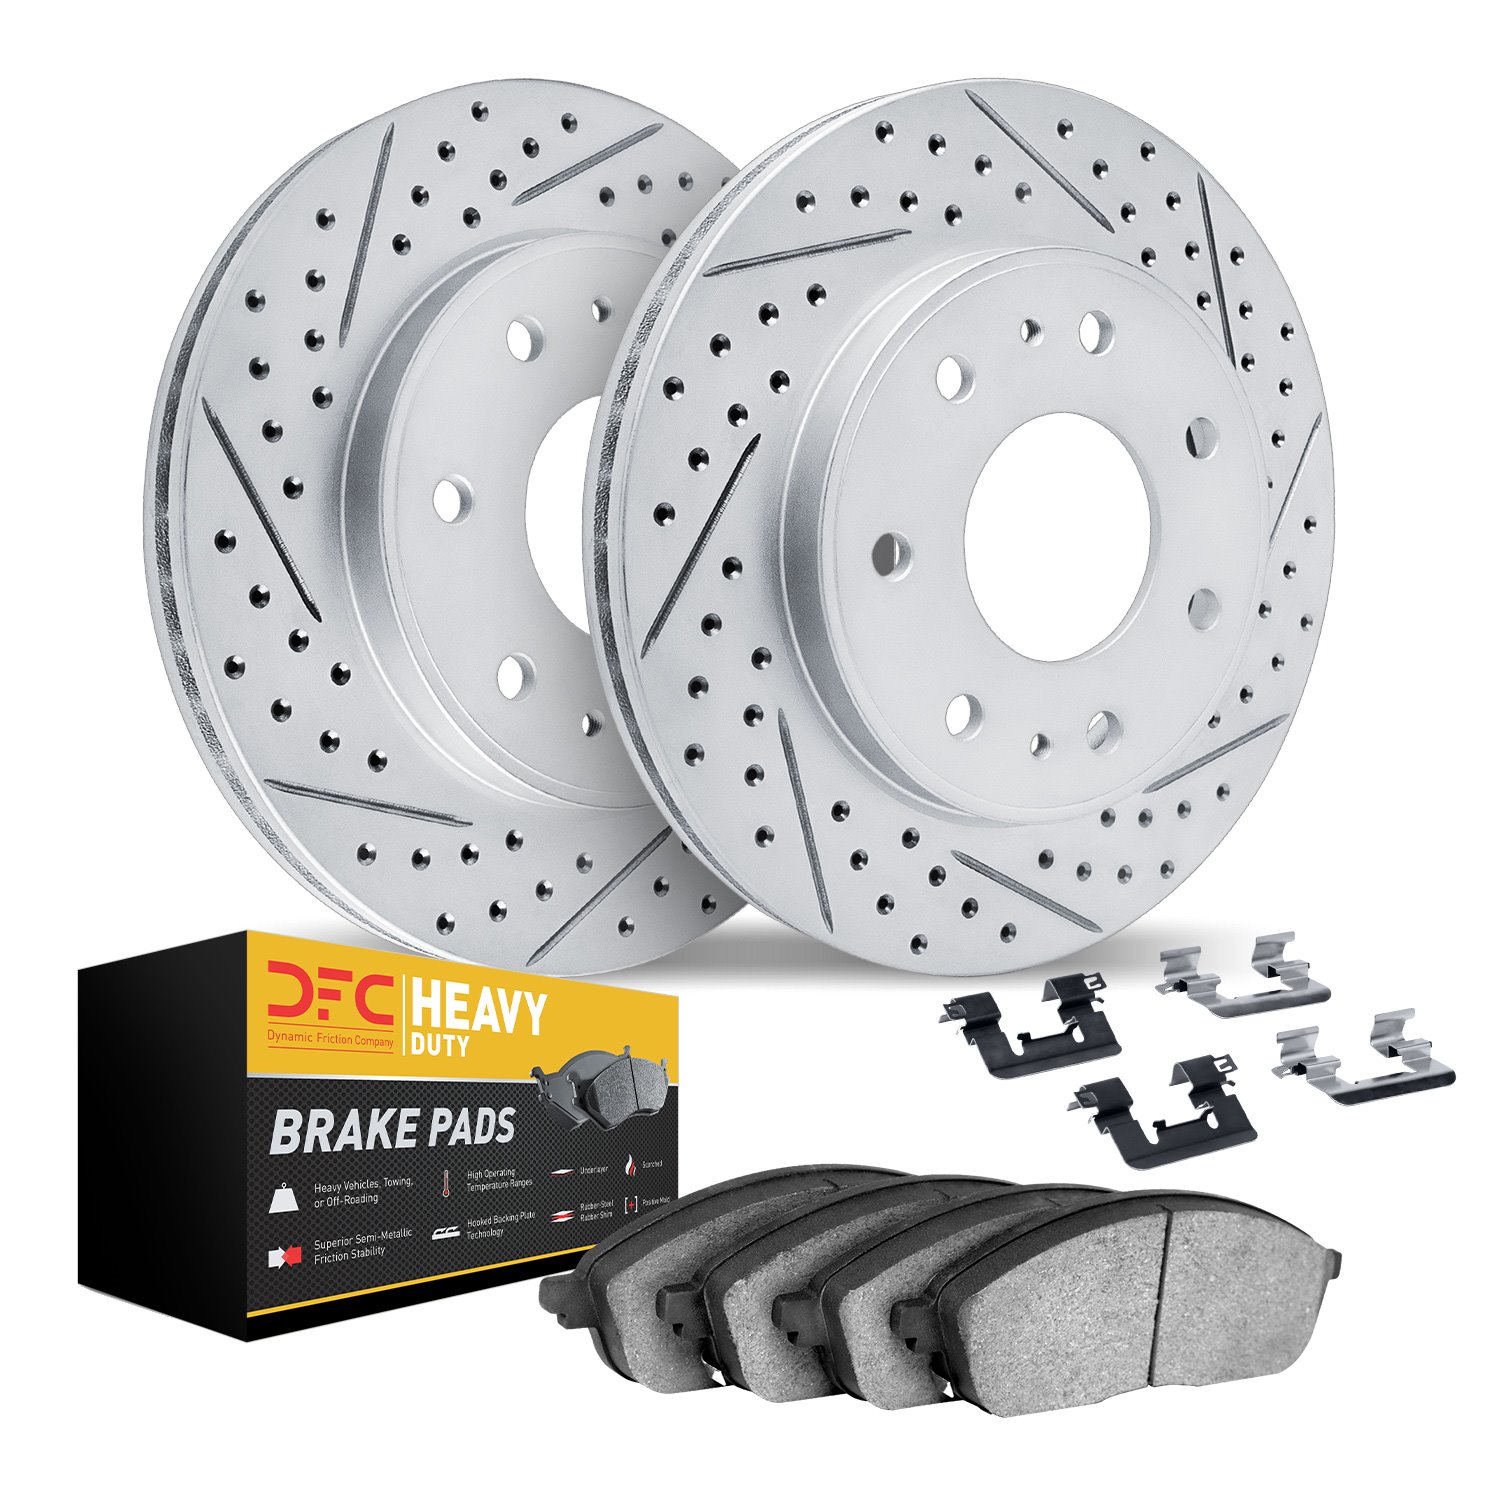 2212-99141 Geoperformance Drilled/Slotted Rotors w/Heavy-Duty Pads Kit & Hardware, 2004-2011 Ford/Lincoln/Mercury/Mazda, Positio